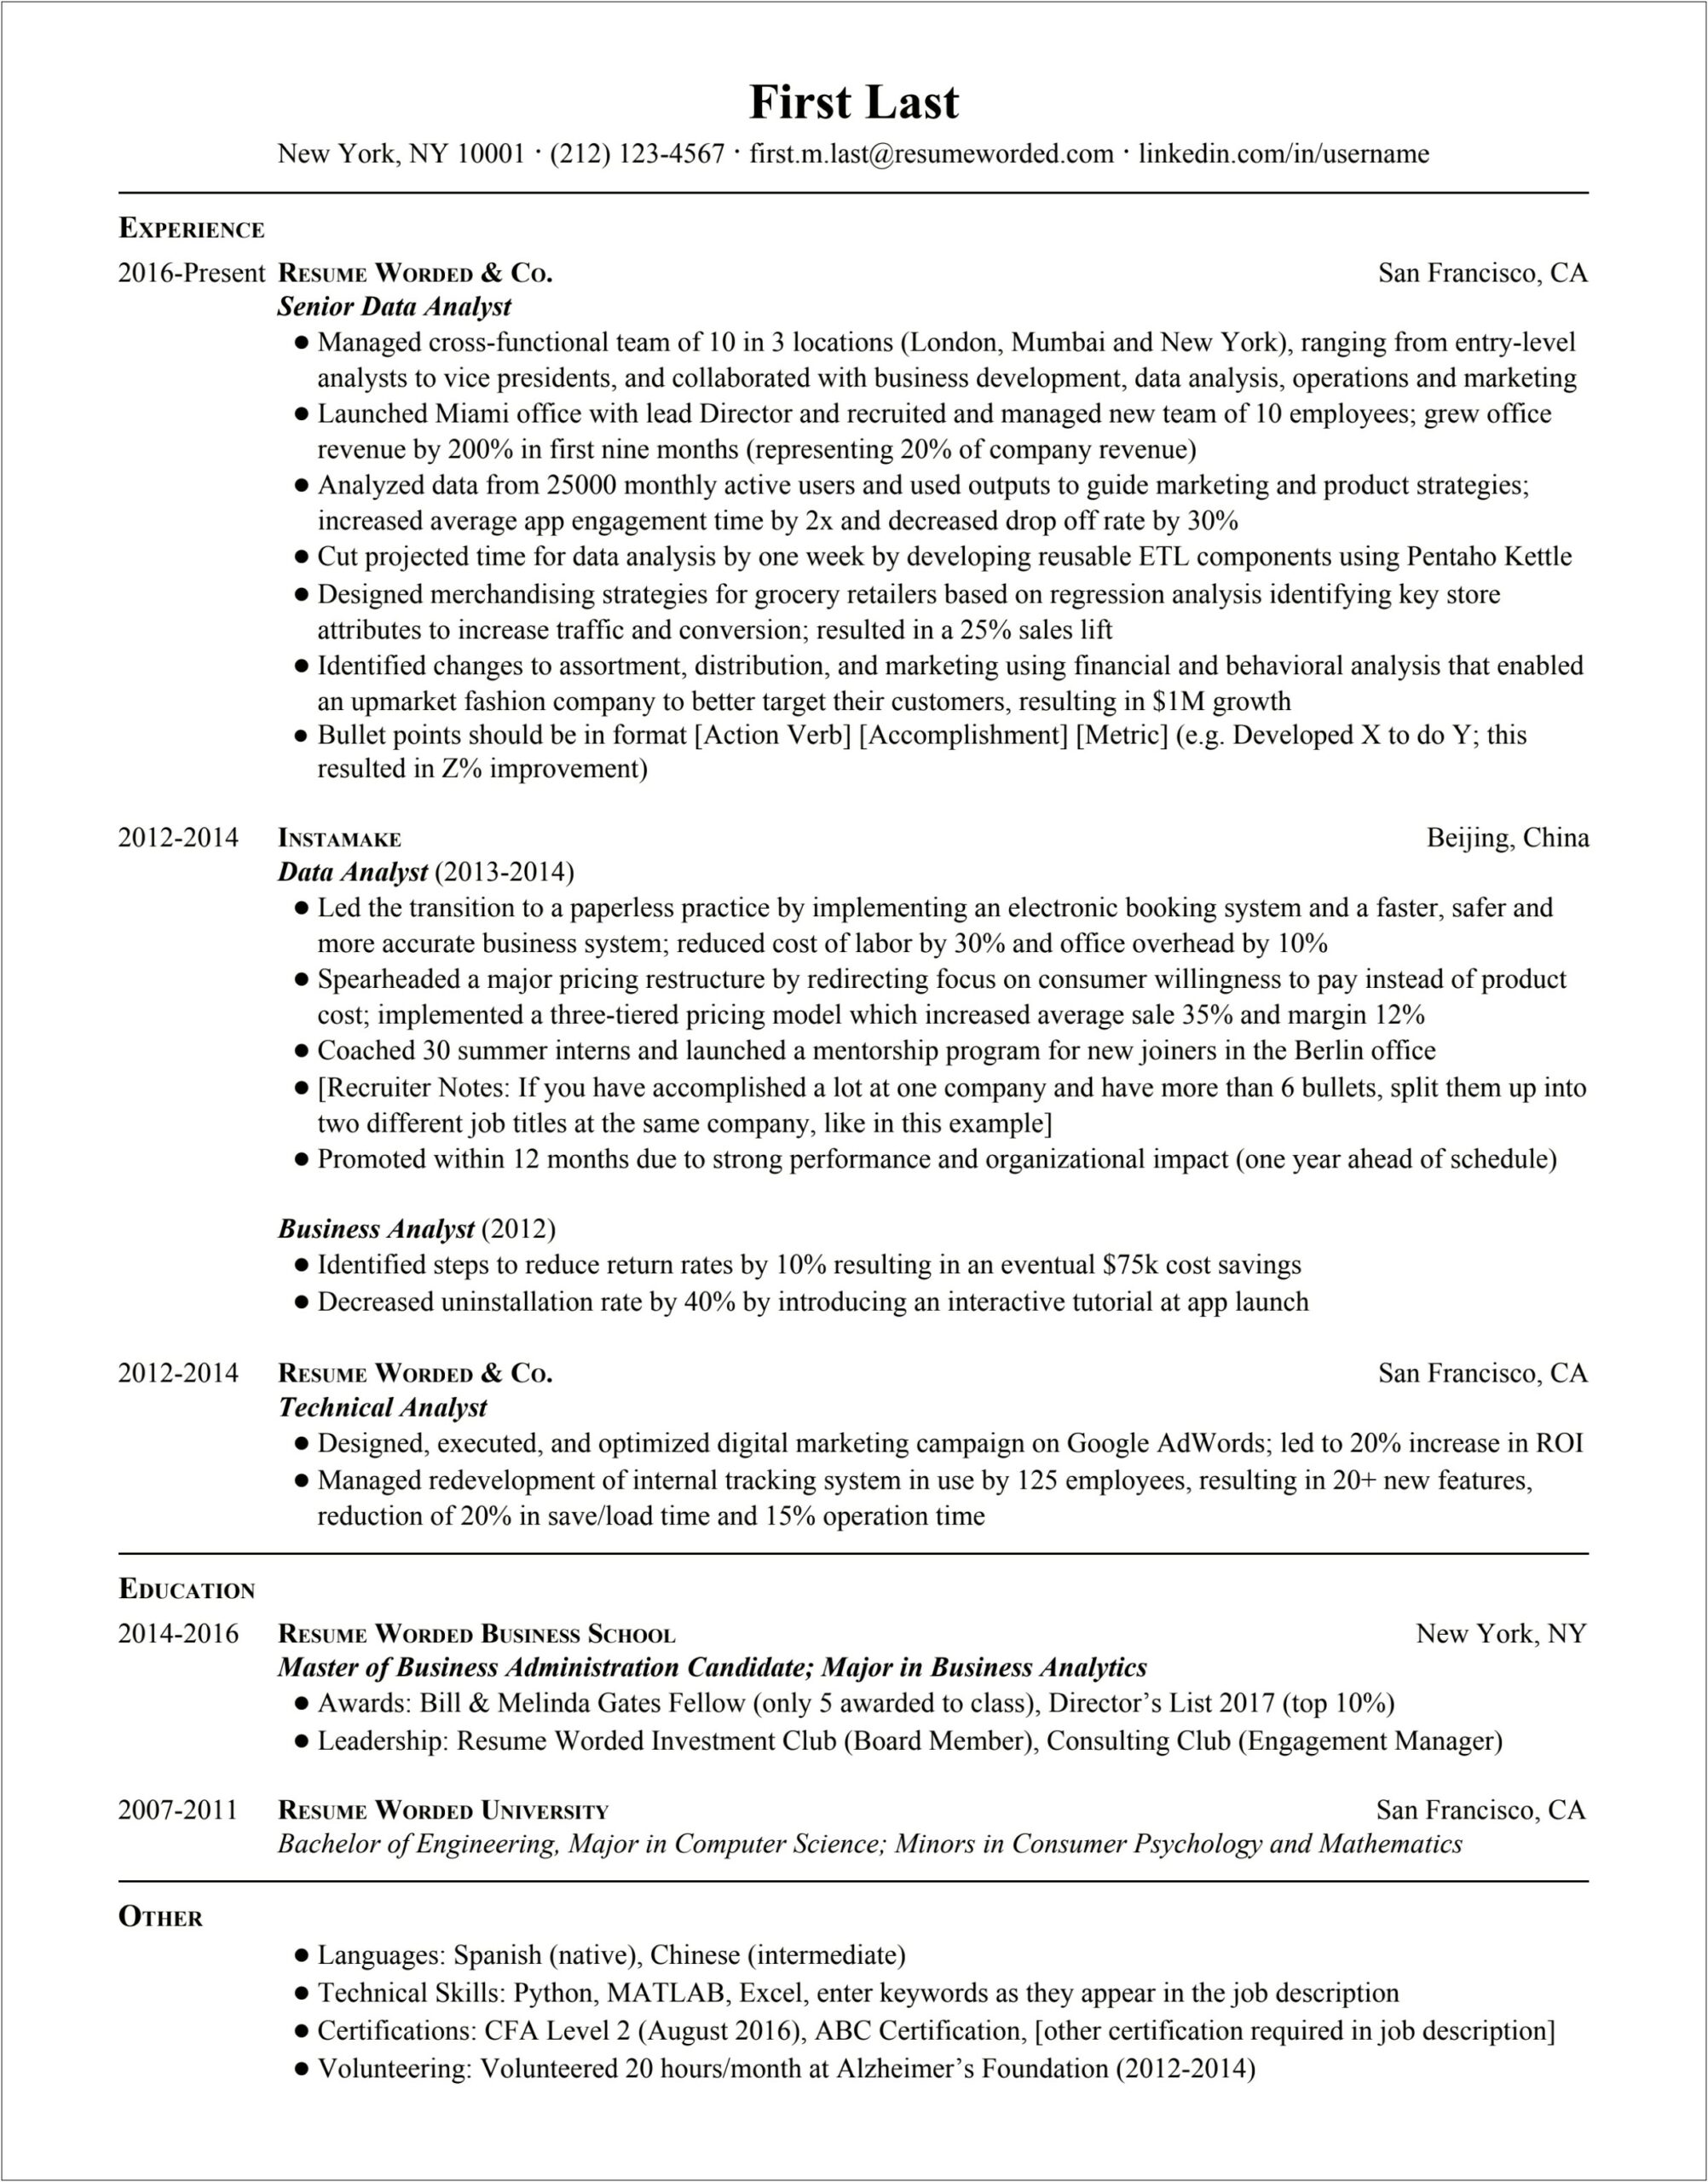 Business Analyst Healthcare Domain Resume Samples